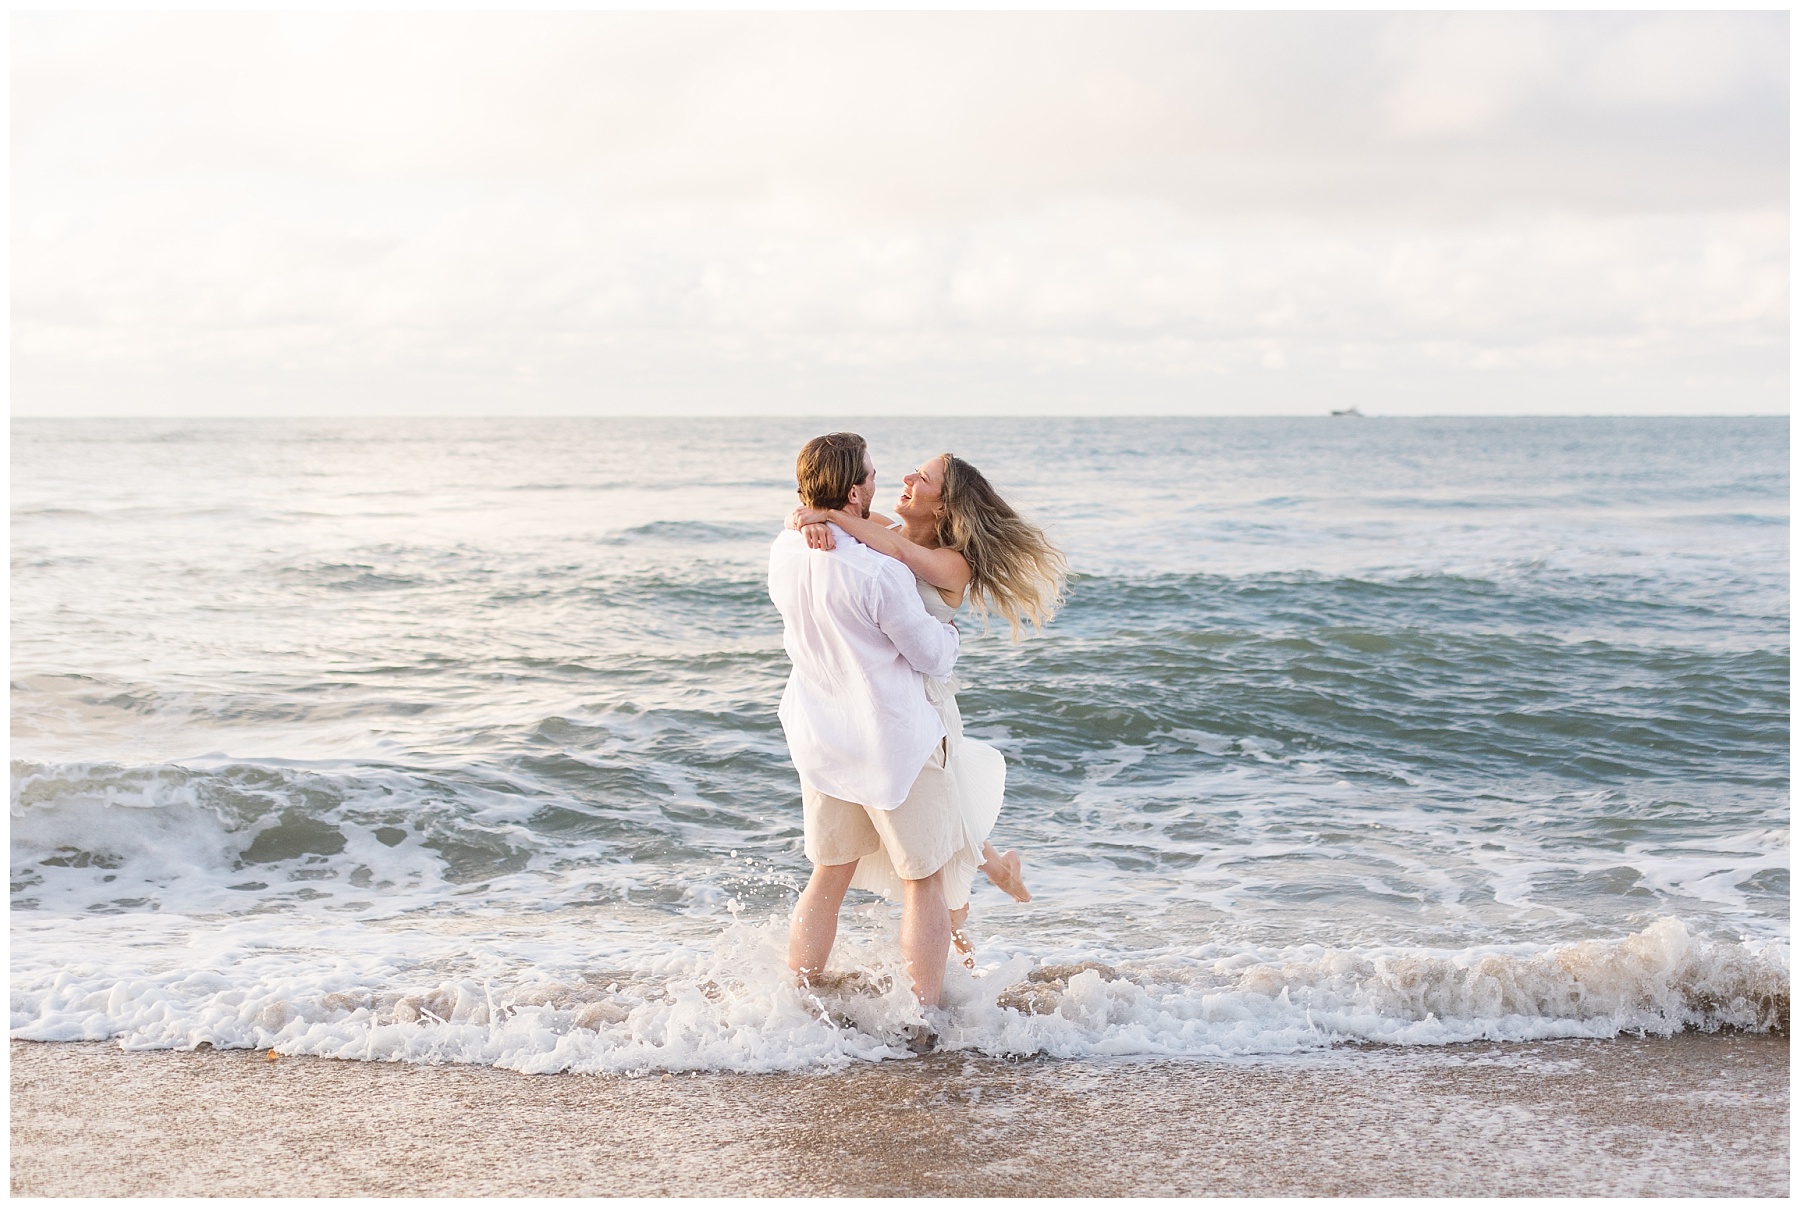 Sunrise Engagement photos at Topsail Beach in Surf City, NC with dogs | NC Wedding Photographer